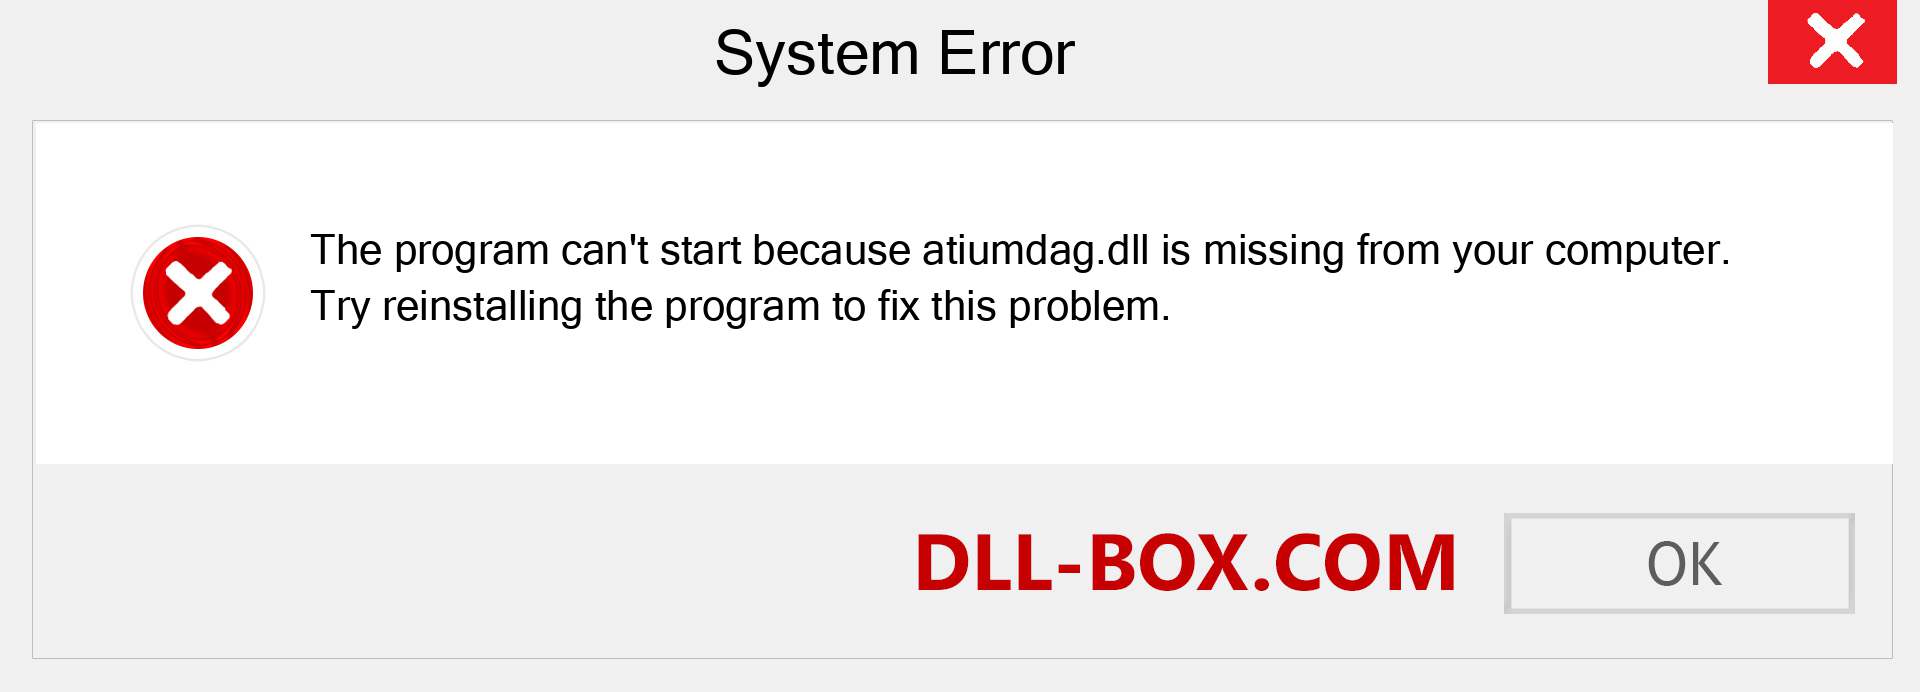  atiumdag.dll file is missing?. Download for Windows 7, 8, 10 - Fix  atiumdag dll Missing Error on Windows, photos, images